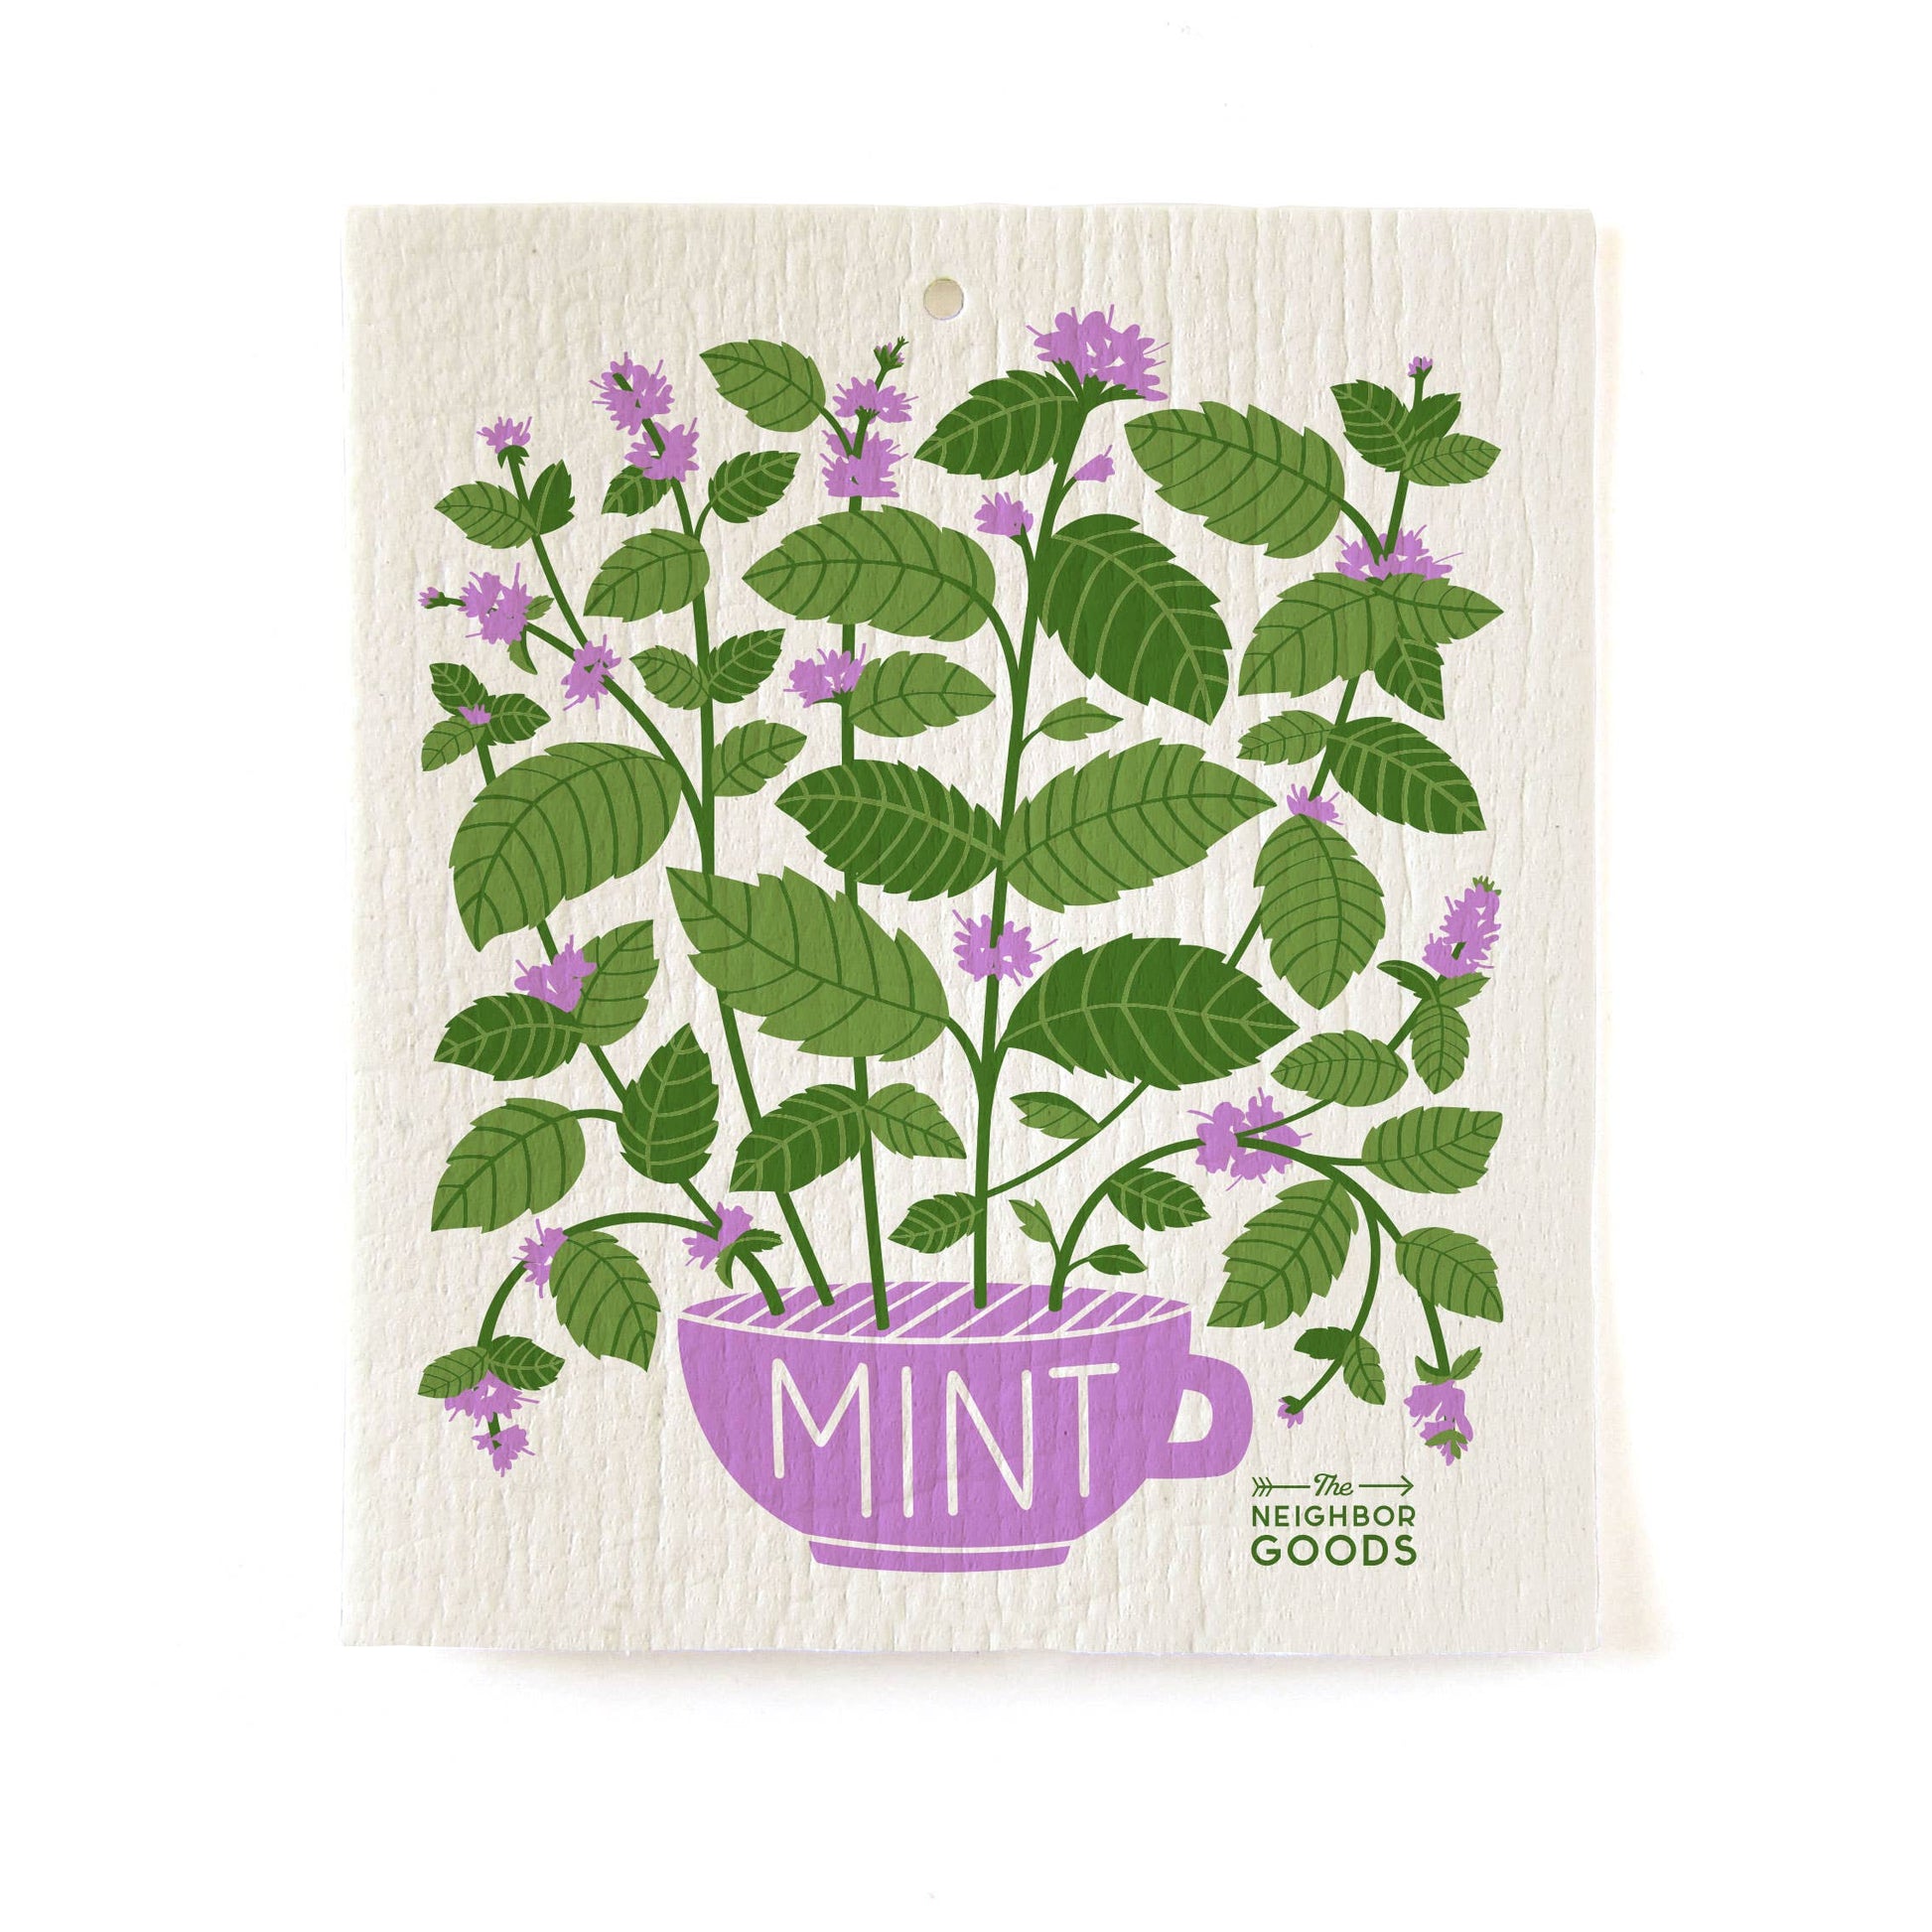 Sponge cloth with printed illustration of flowering mint plant growing out of a purple teacup labeled "MINT".